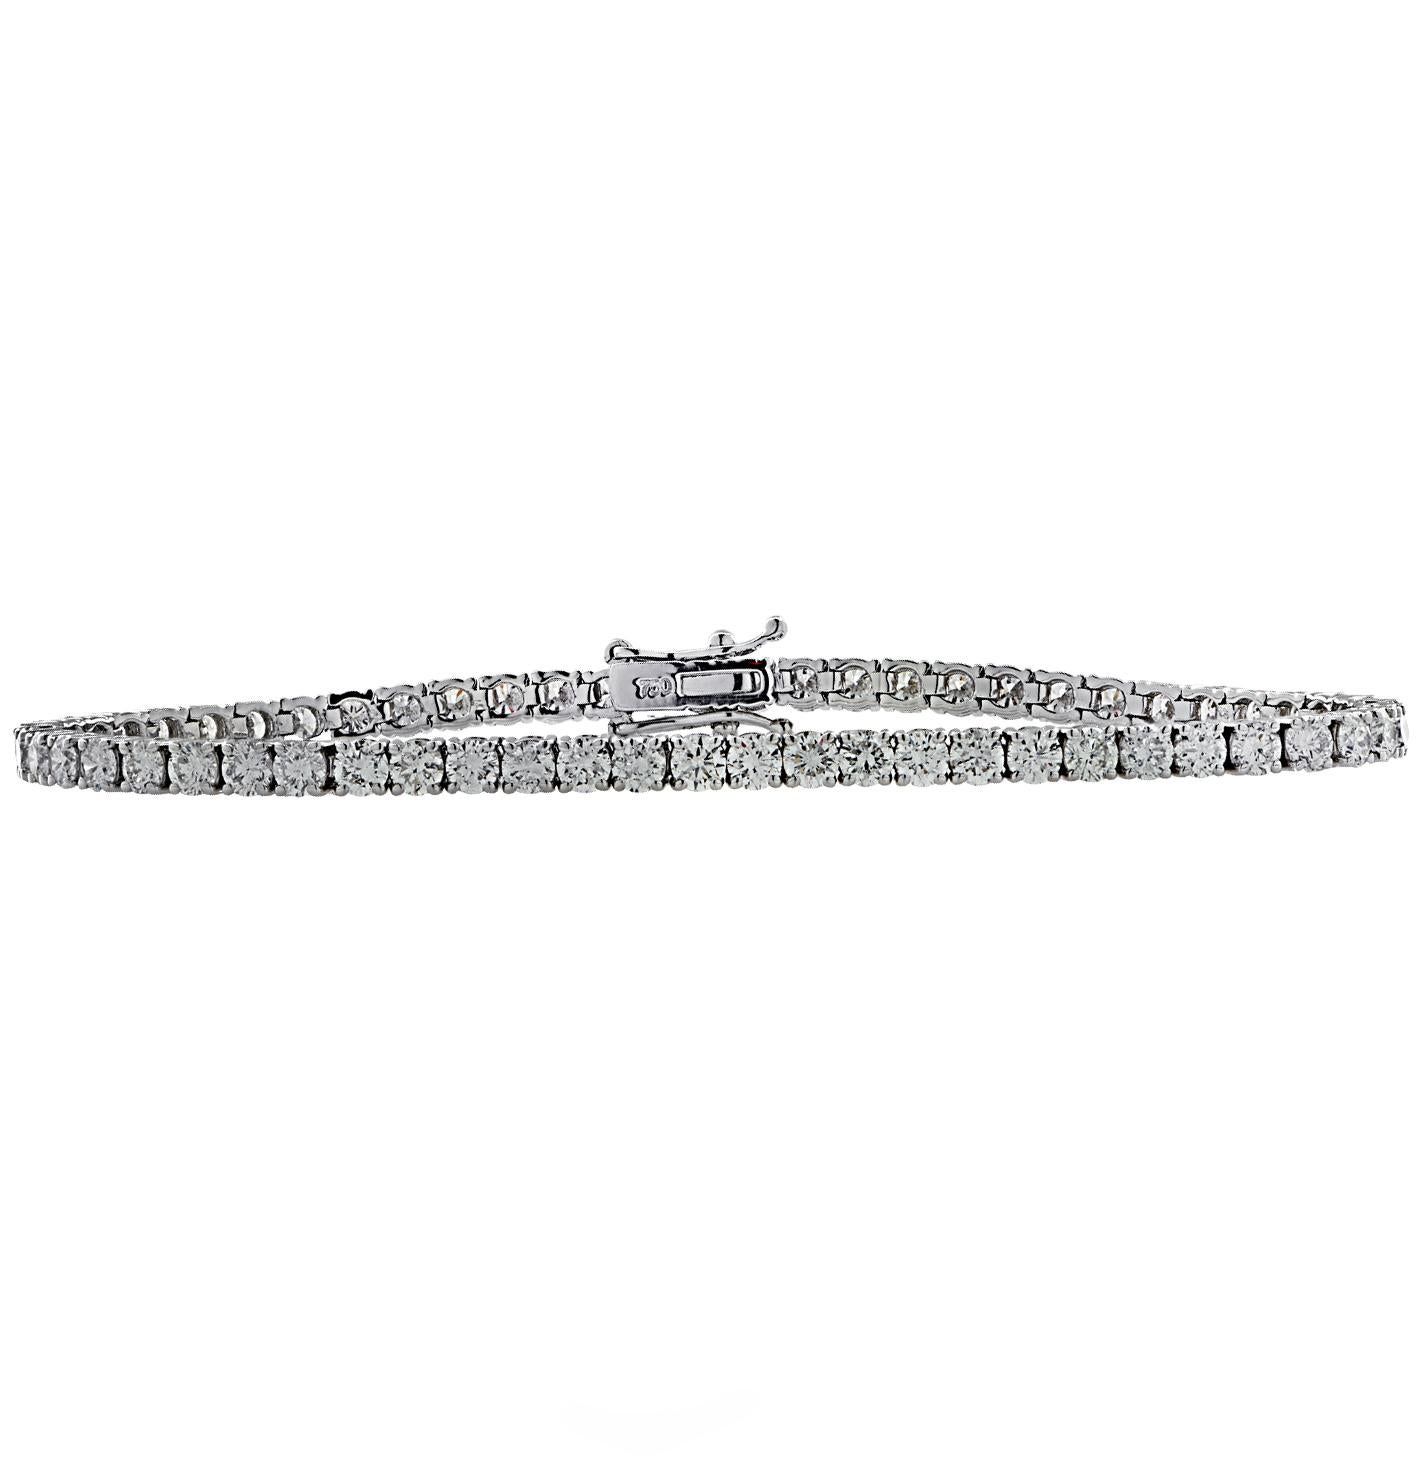 Spectacular Vivid Diamonds diamond tennis bracelet crafted in 18 karat white gold, showcasing 69 stunning round brilliant cut diamonds weighing approximately 3.14 carats total, H color, SI clarity. Each diamond is carefully selected, perfectly